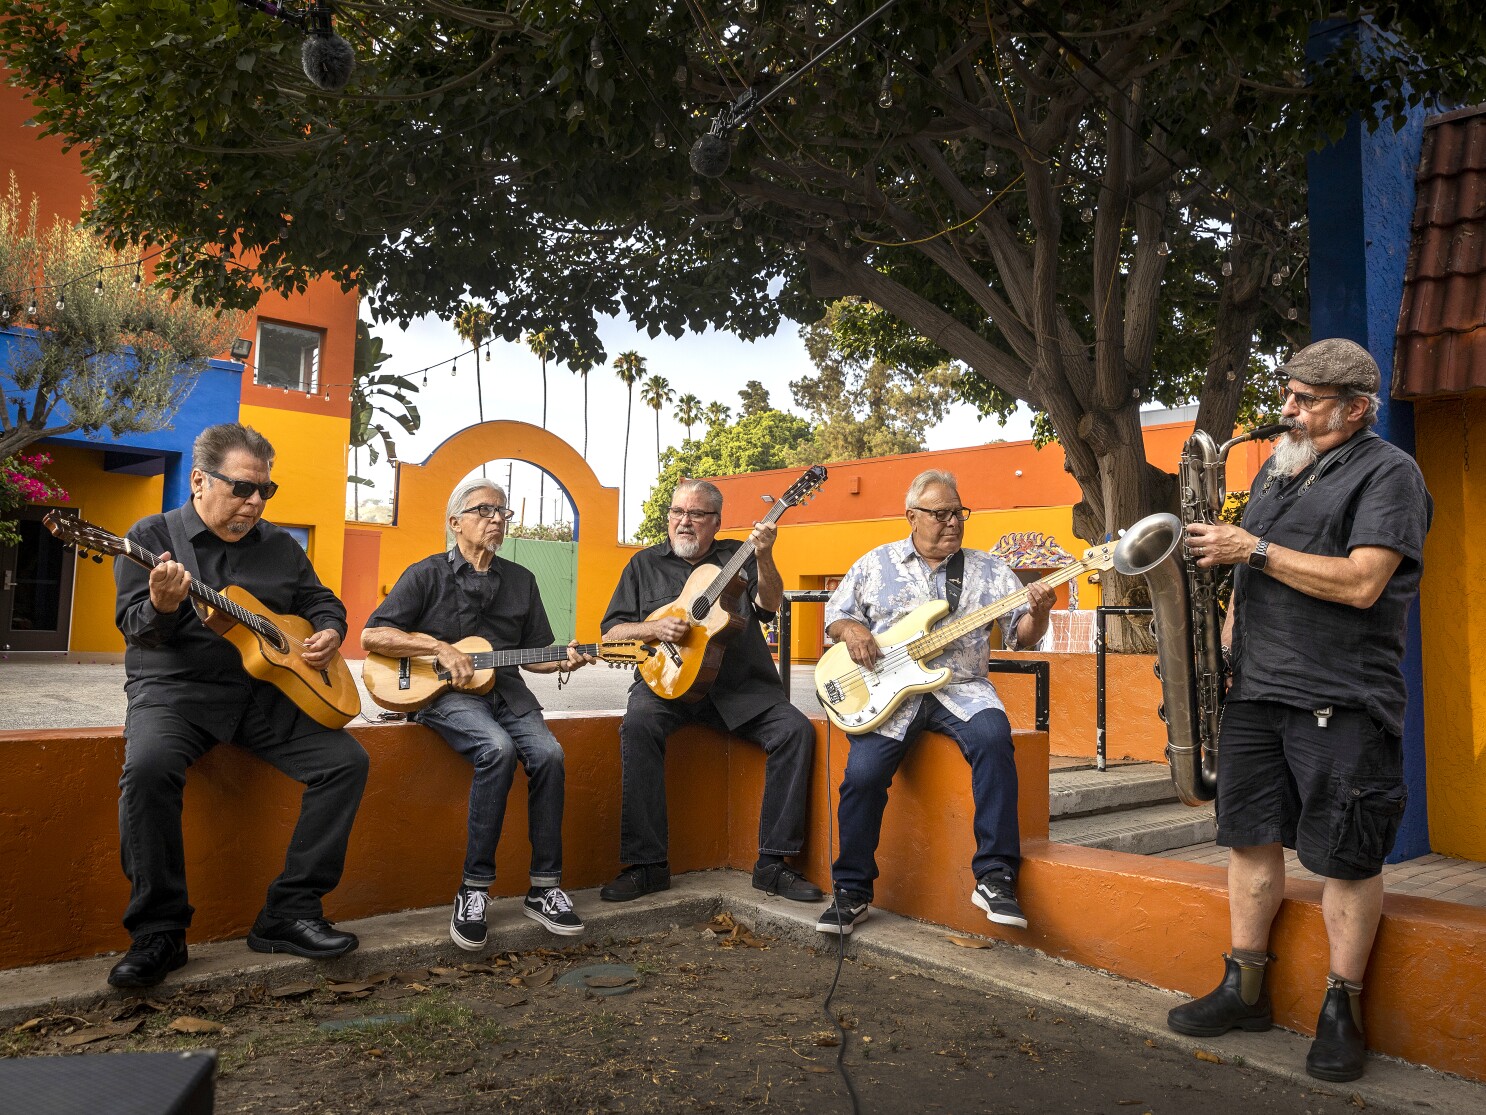 Los Lobos their L.A. with covers album Los Angeles Times